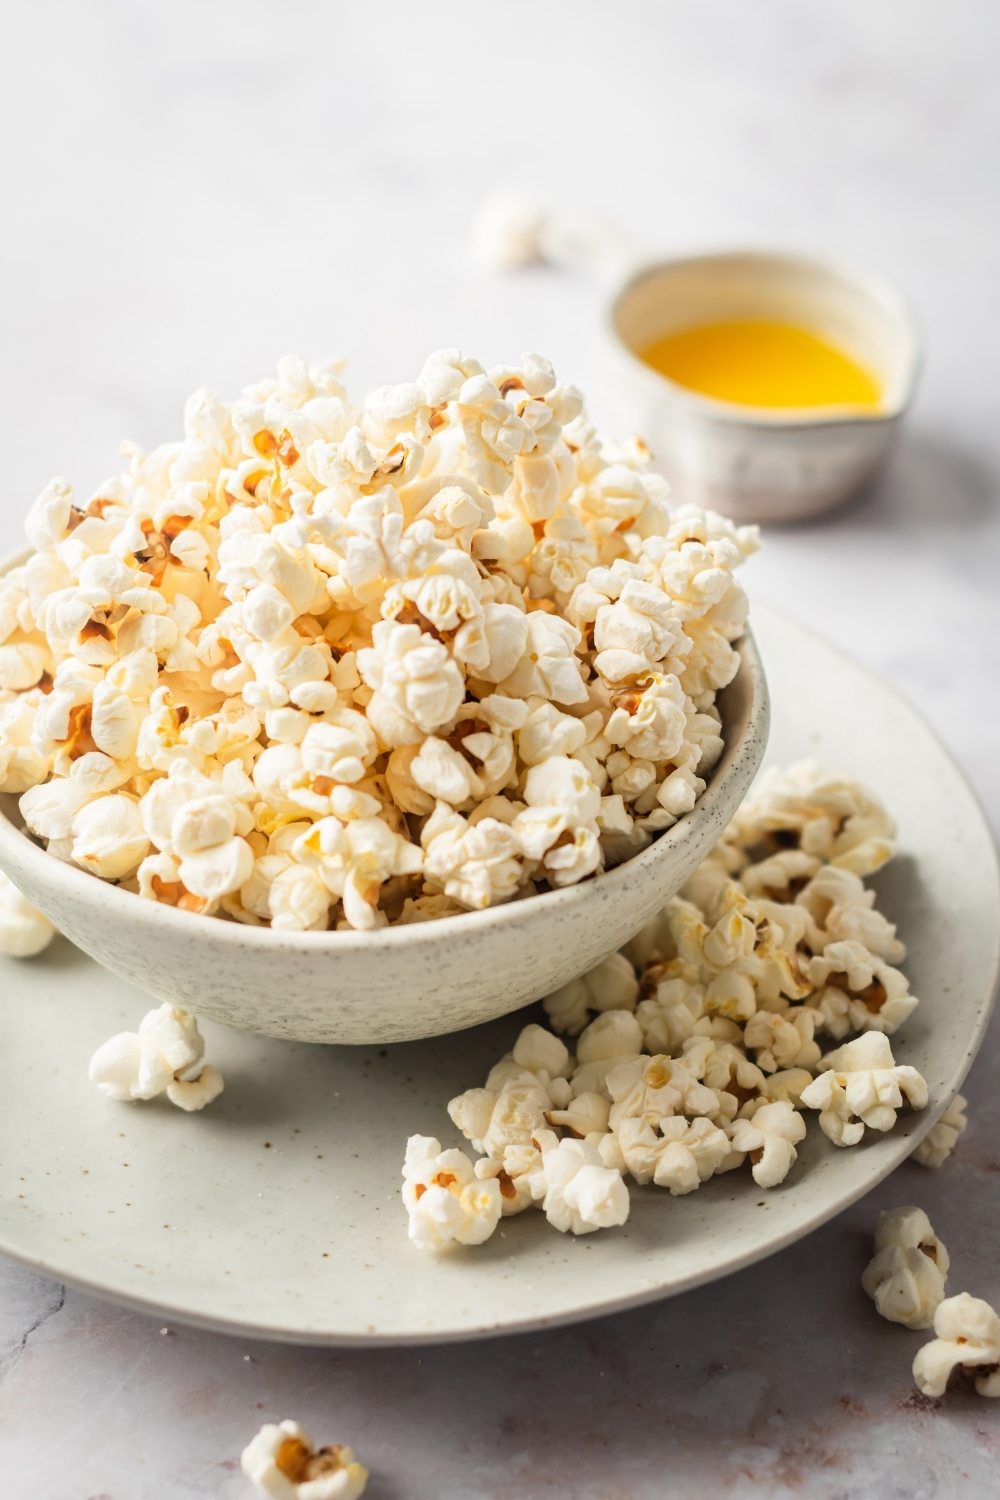 A white plate with a bowl of popcorn on it. There are a few pieces of popcorn on the plate and behind is a small white cup of melted butter.